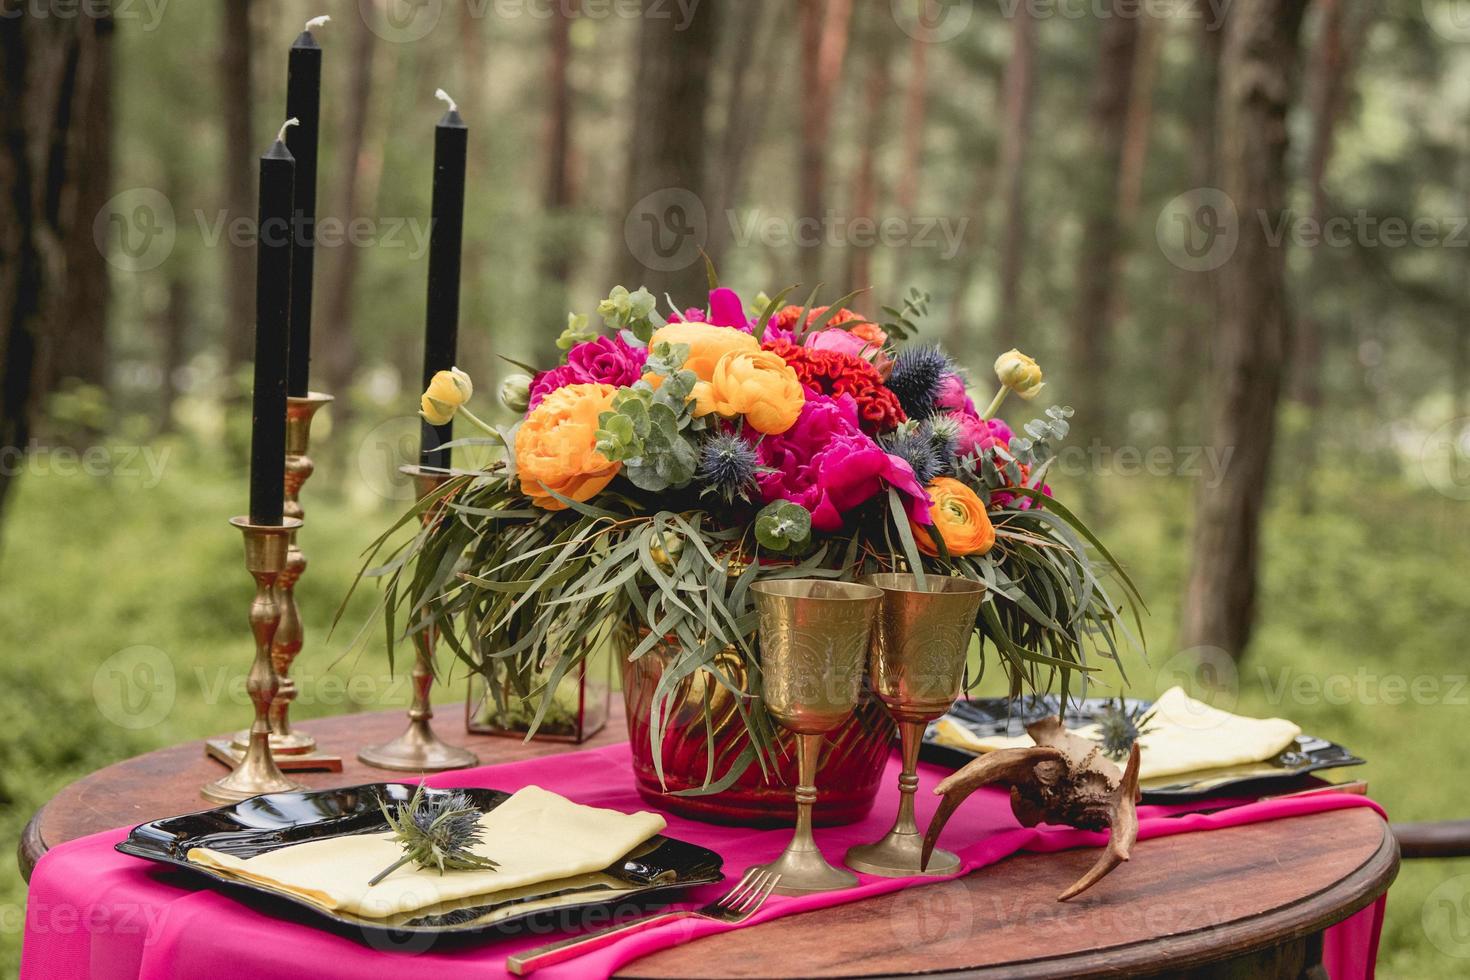 Decorated wooden table with flowers, candles, utensils photo